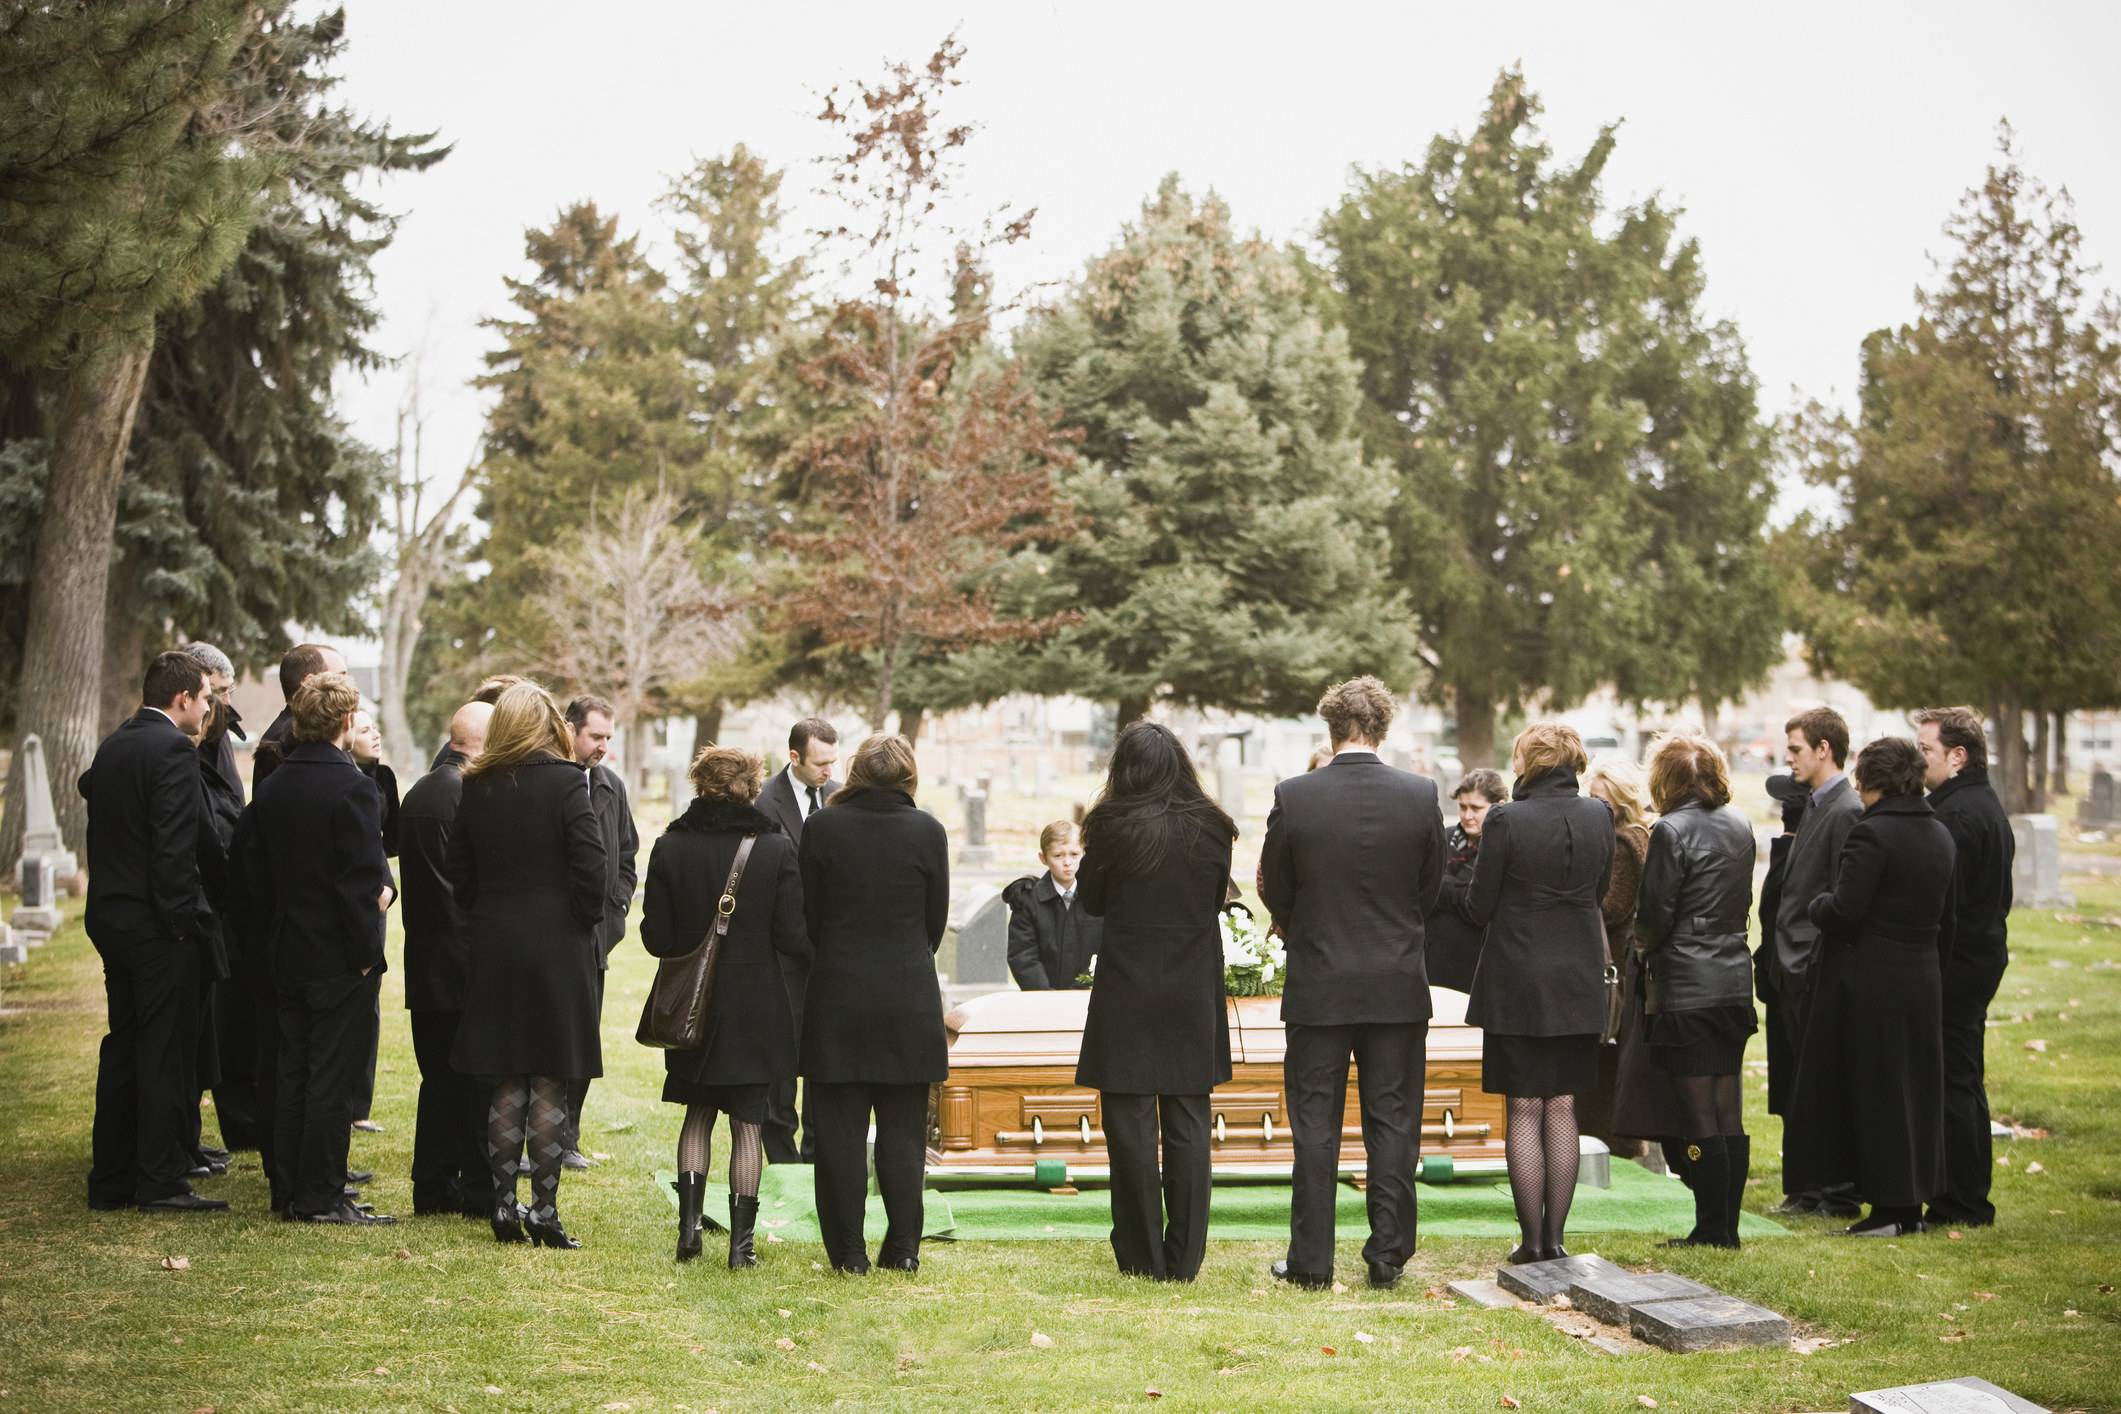 People at outdoor funeral